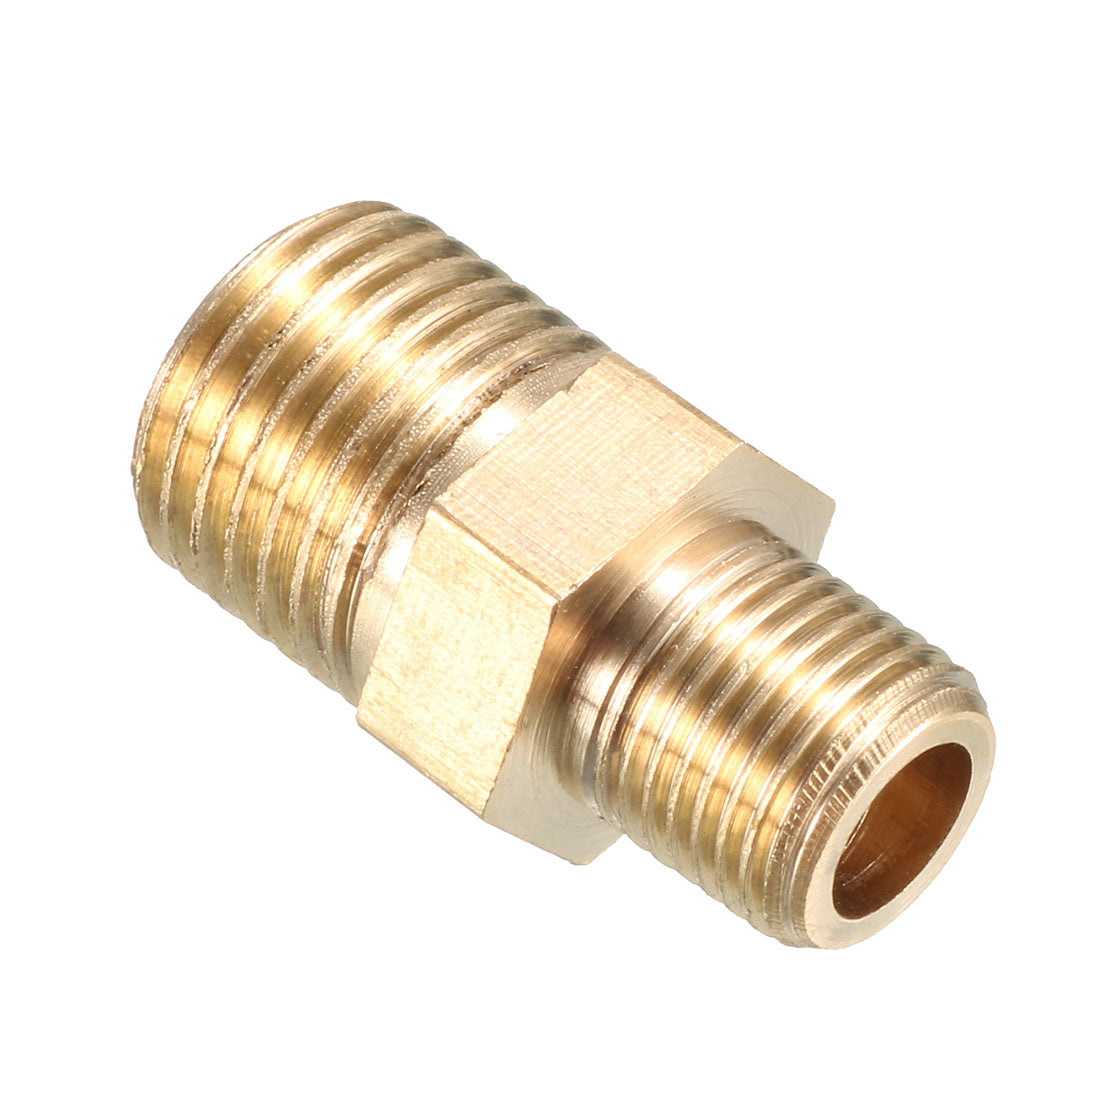 uxcell Uxcell Brass Pipe Fitting Reducing Hex Bushing 1/4 BSP Male x 1/8 BSP Male Adapter